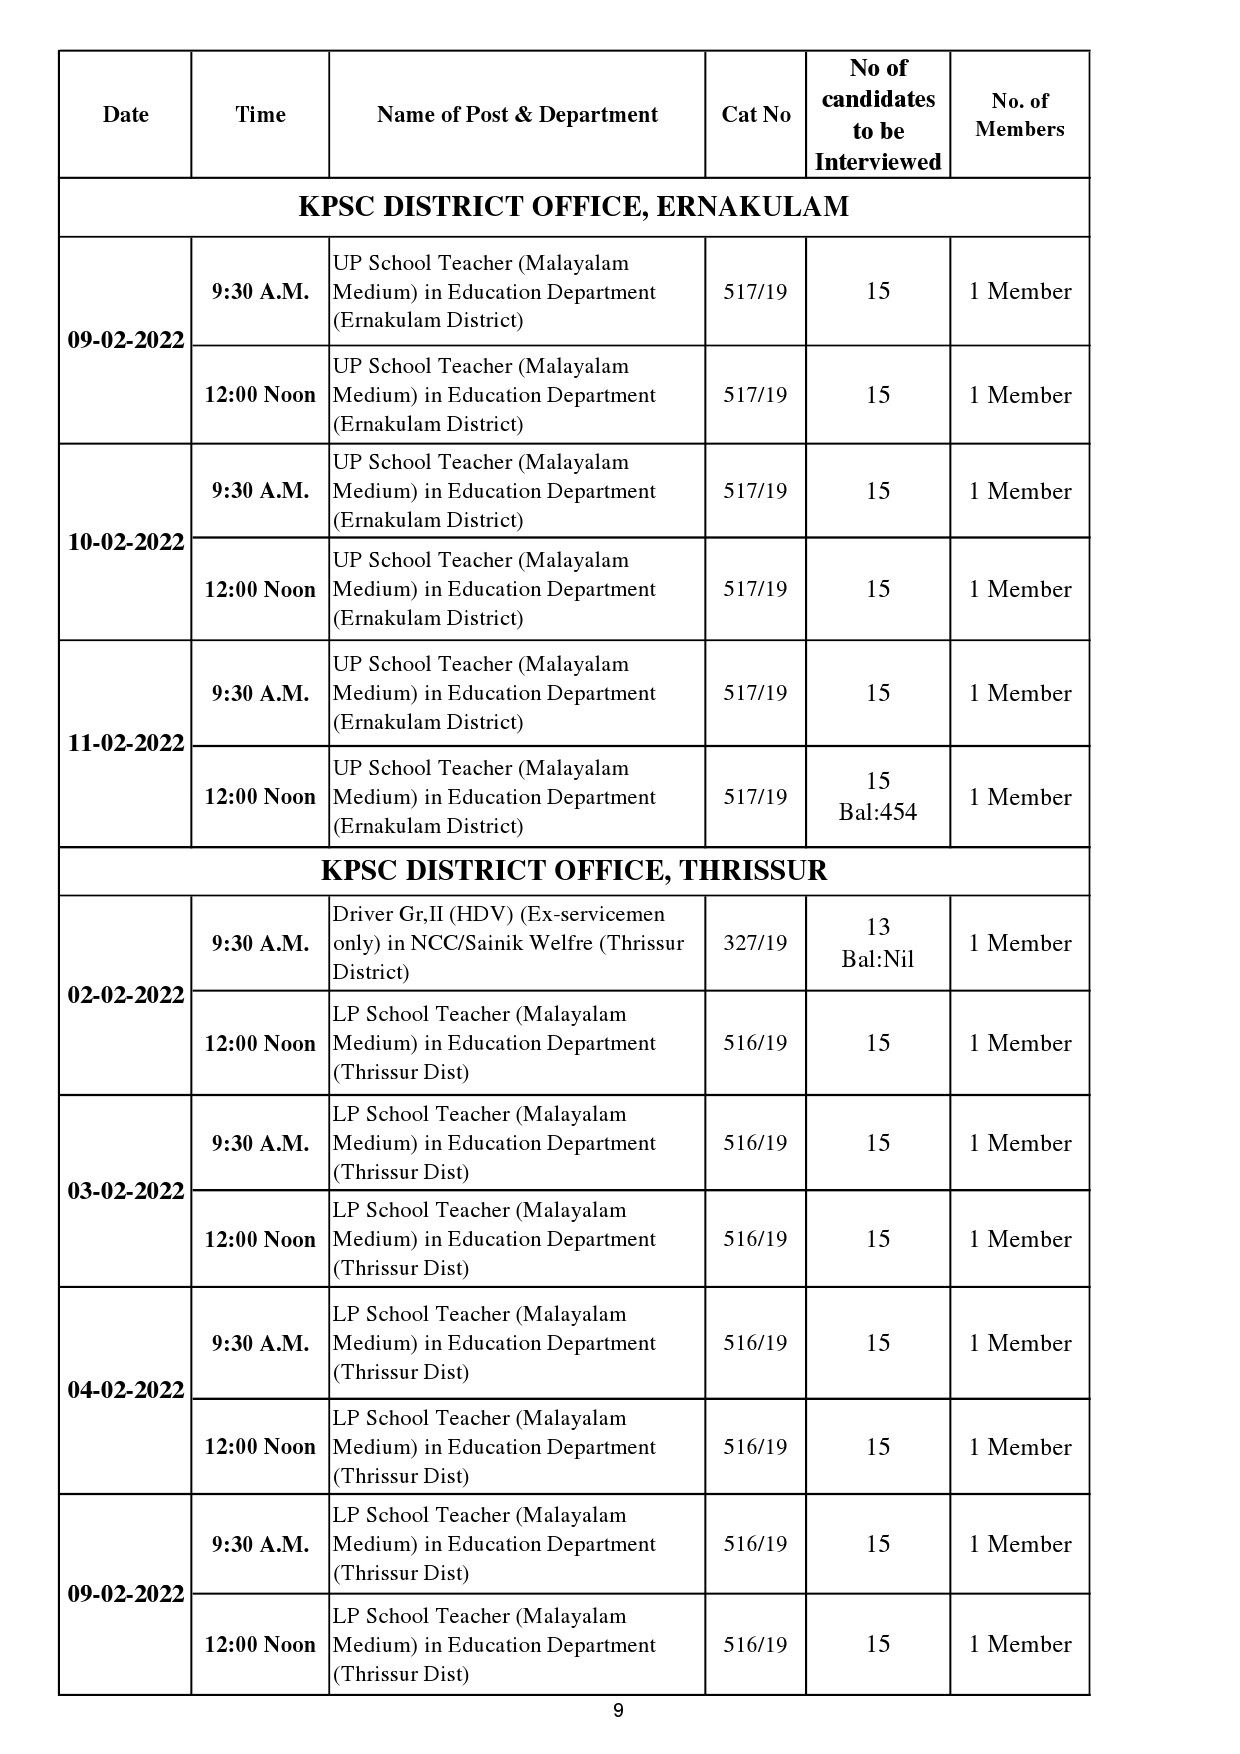 KPSC INTERVIEW PROGRAMME FOR THE MONTH OF FEBRUARY 2022 - Notification Image 9